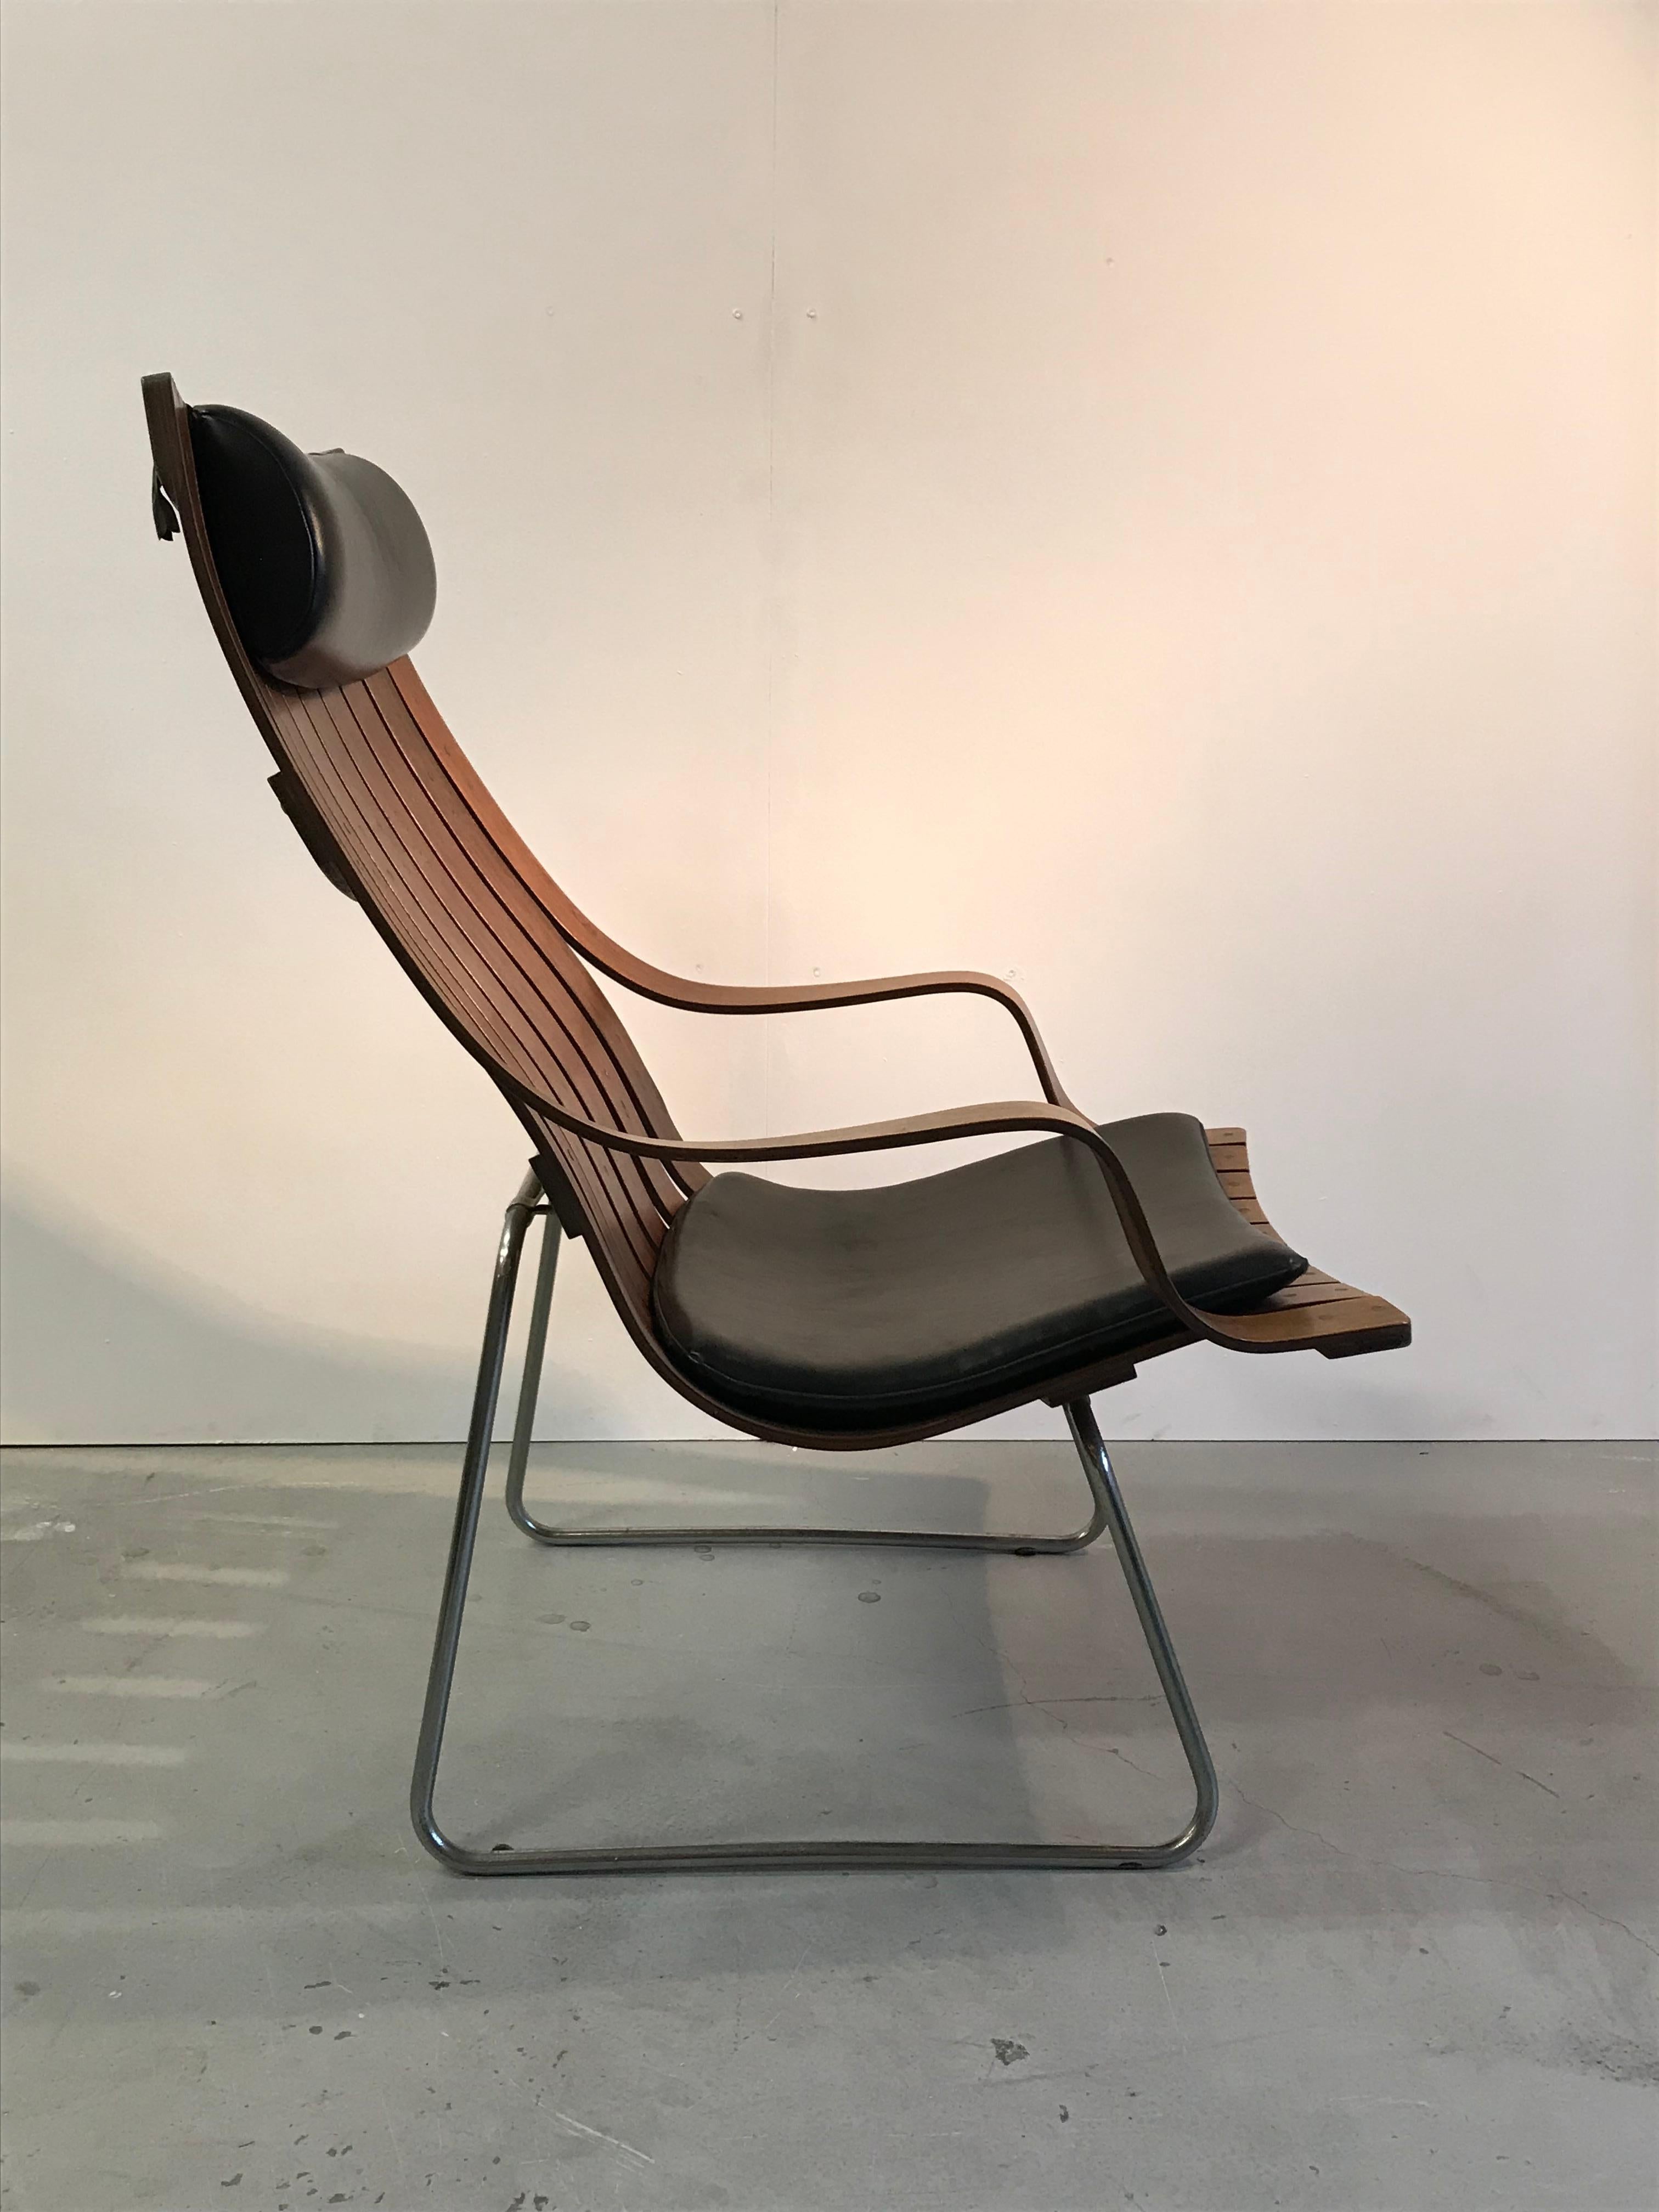 Special Hans Brattrud easy chair. Designed in the 1950s.
The design with the vertical ribs attached to horizontal laminated slabs make it an ingenious construction transforming it to a true eyecatcher. 

Not for nothing it won several design